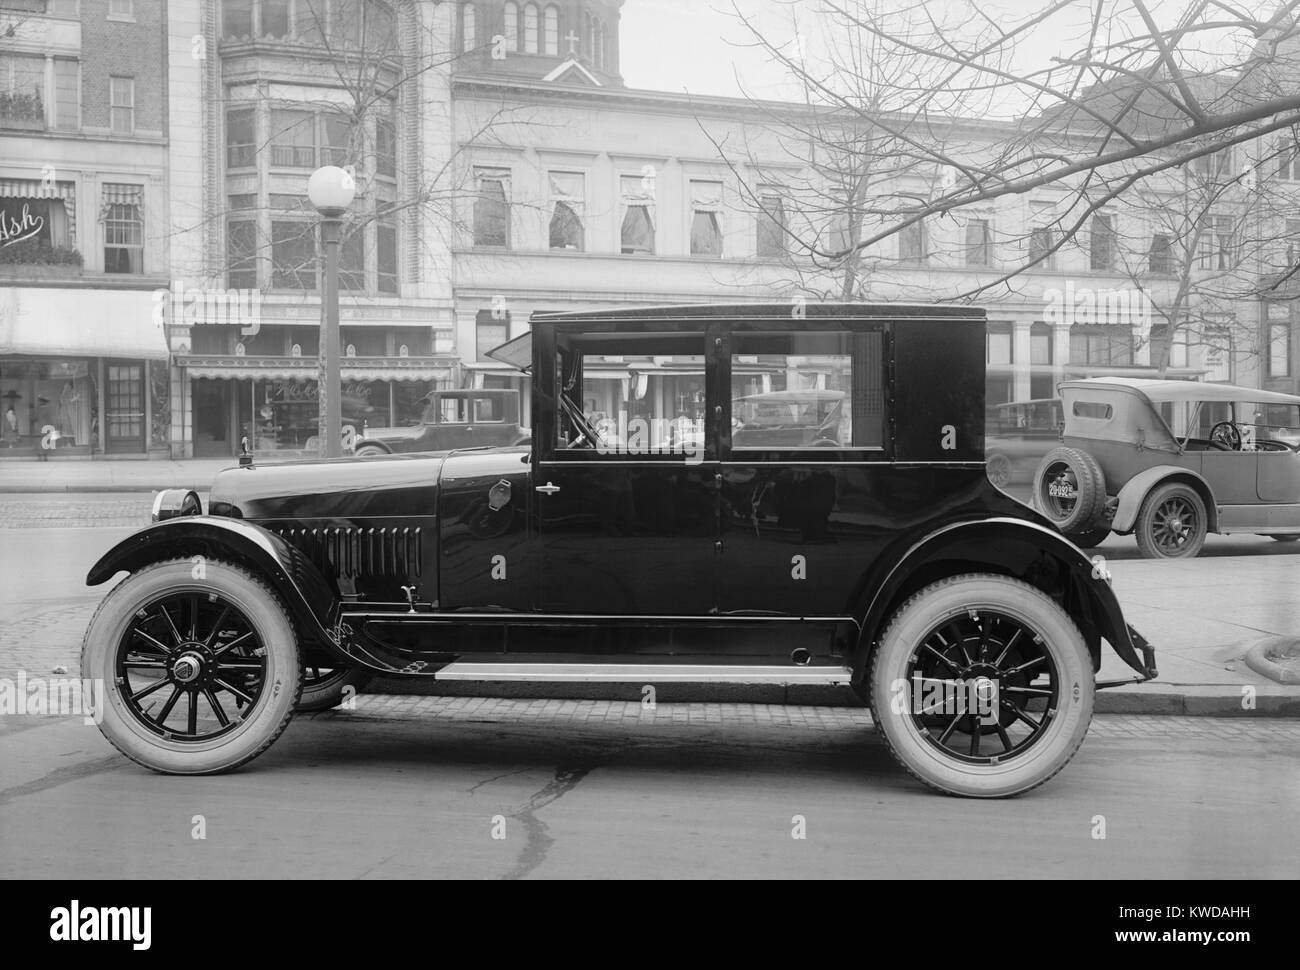 Hudson Essex, four passenger coach, 1922. Hudson Motor Car Company introduced the lower priced Essex in 1919, to compete with Ford and Chevrolet. 1,130,000 Essex automobiles were sold by its retirement in 1932 (BSLOC 2016 10 110) Stock Photo